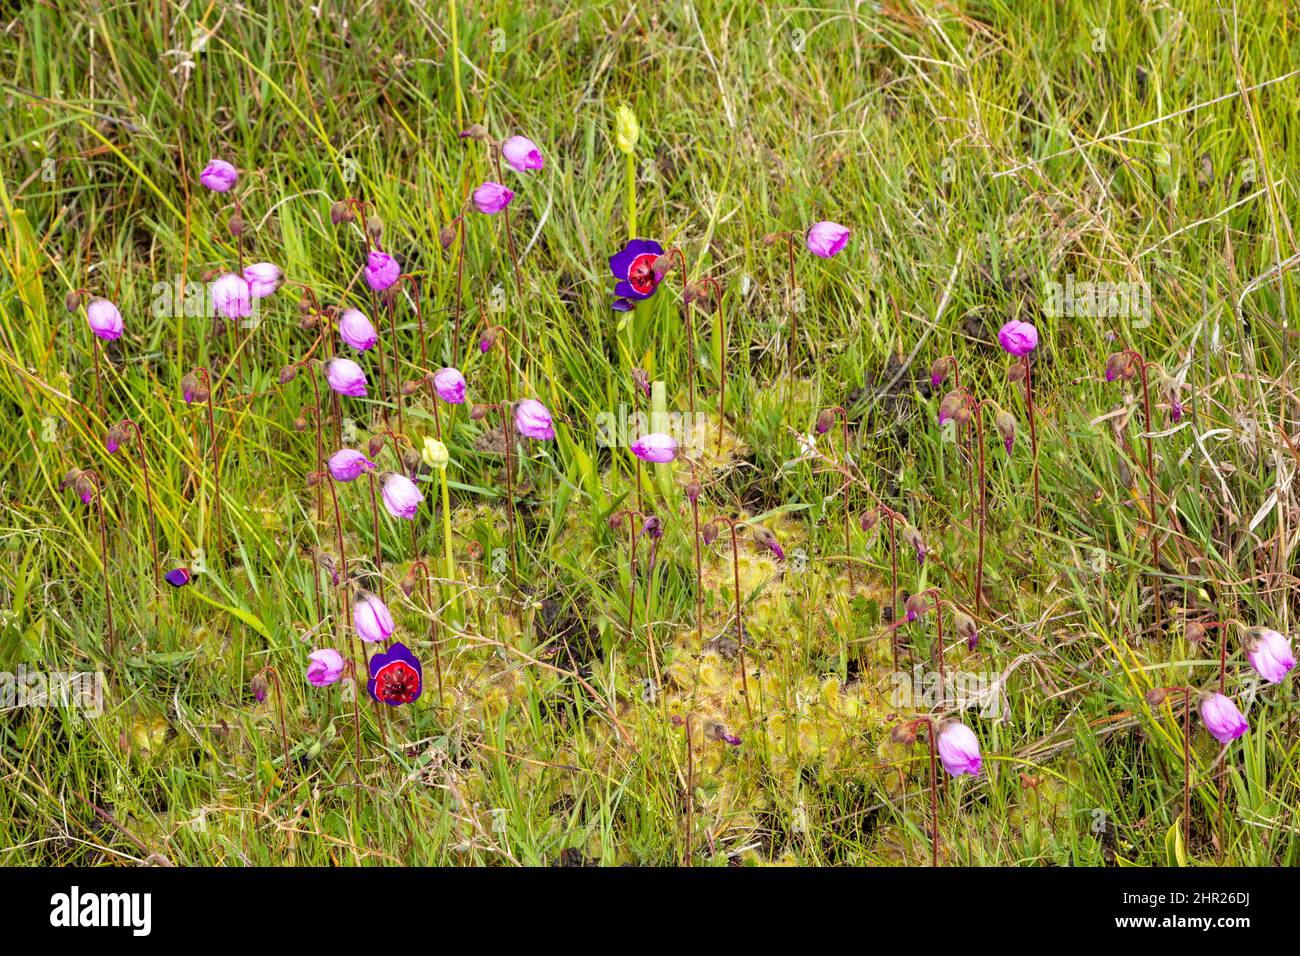 South African Wildflowers: Drosera pauciflora and Geissorhiza radians in natural habitat near Darling in the Western Cape of South Africa Stock Photo